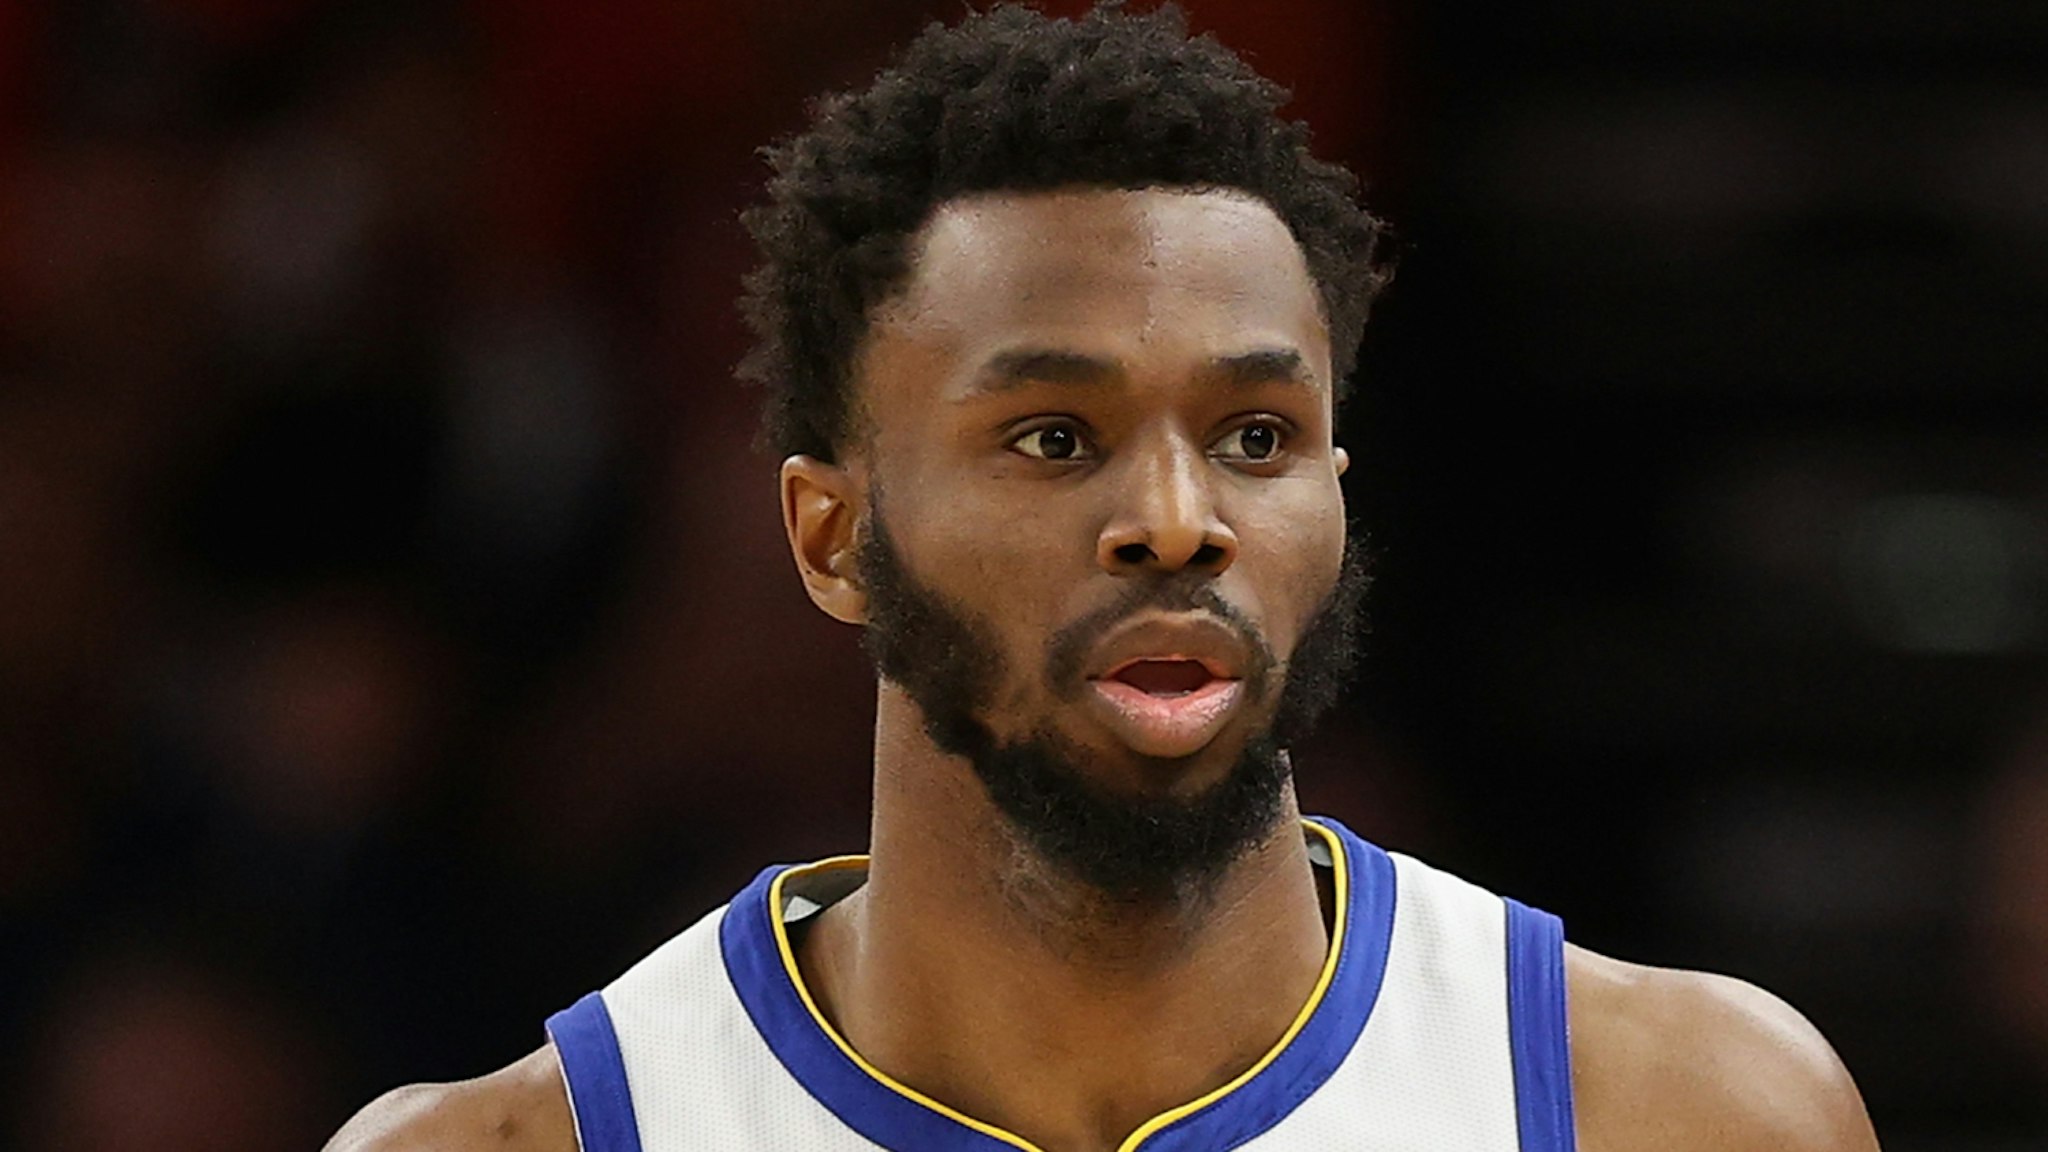 Andrew Wiggins #22 of the Golden State Warriors handles the ball during the first half of the NBA game at Footprint Center on November 30, 2021 in Phoenix, Arizona.